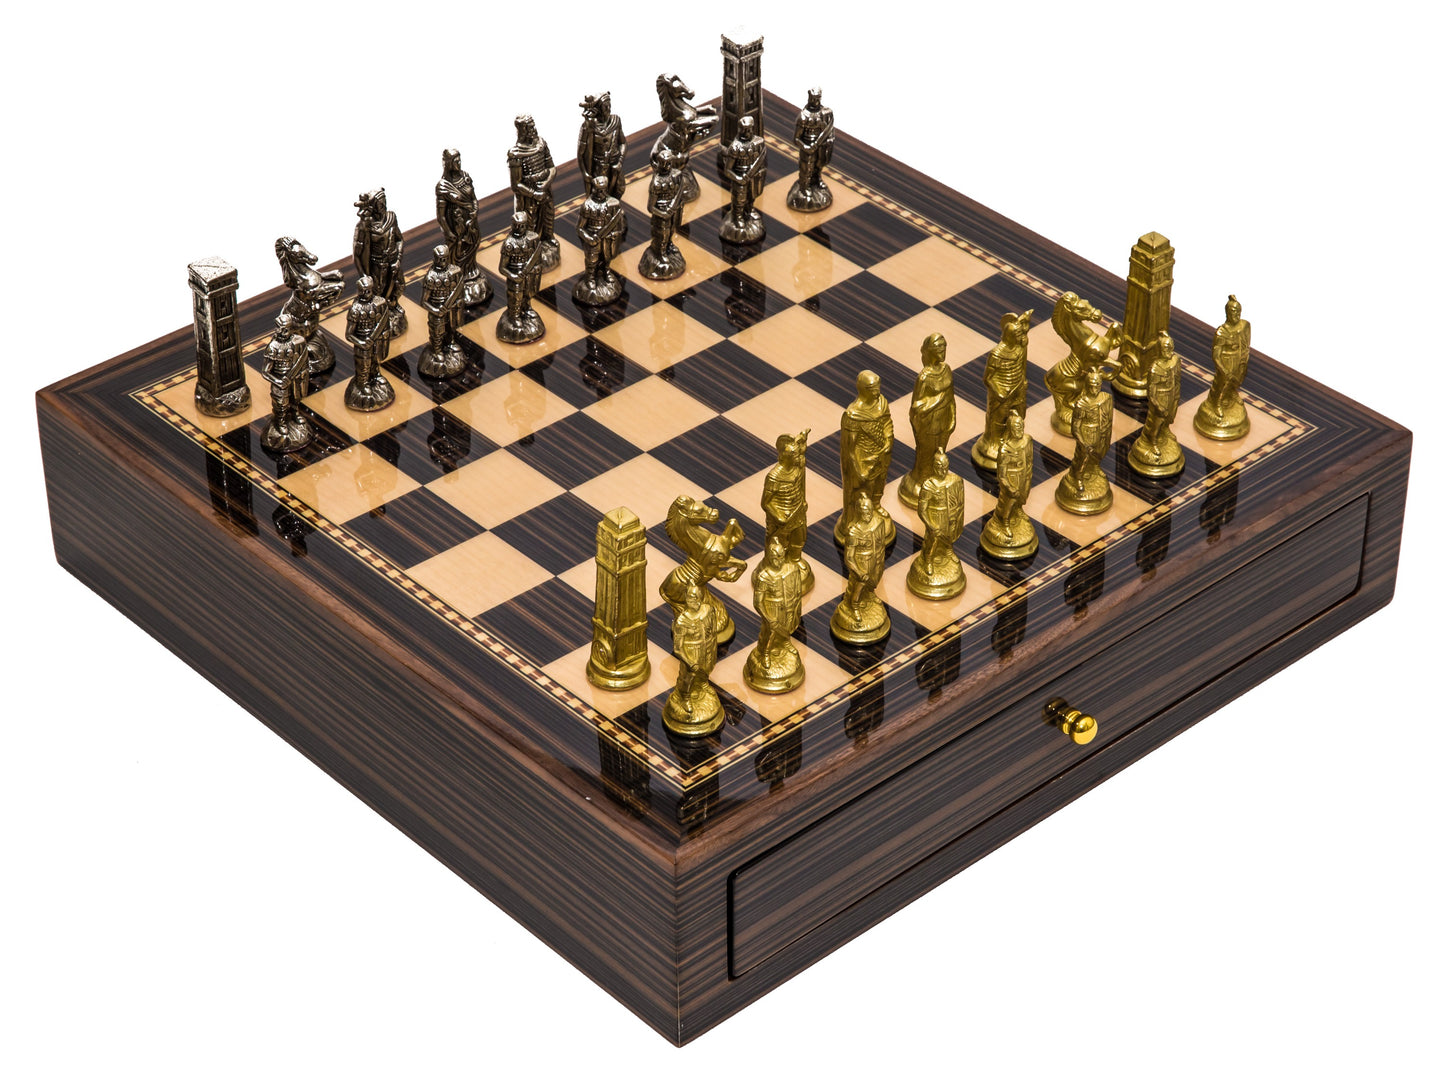 Silver-plated Brass Romans vs Barbarians Themed Chessmen & Deluxe Board Case Chess Set